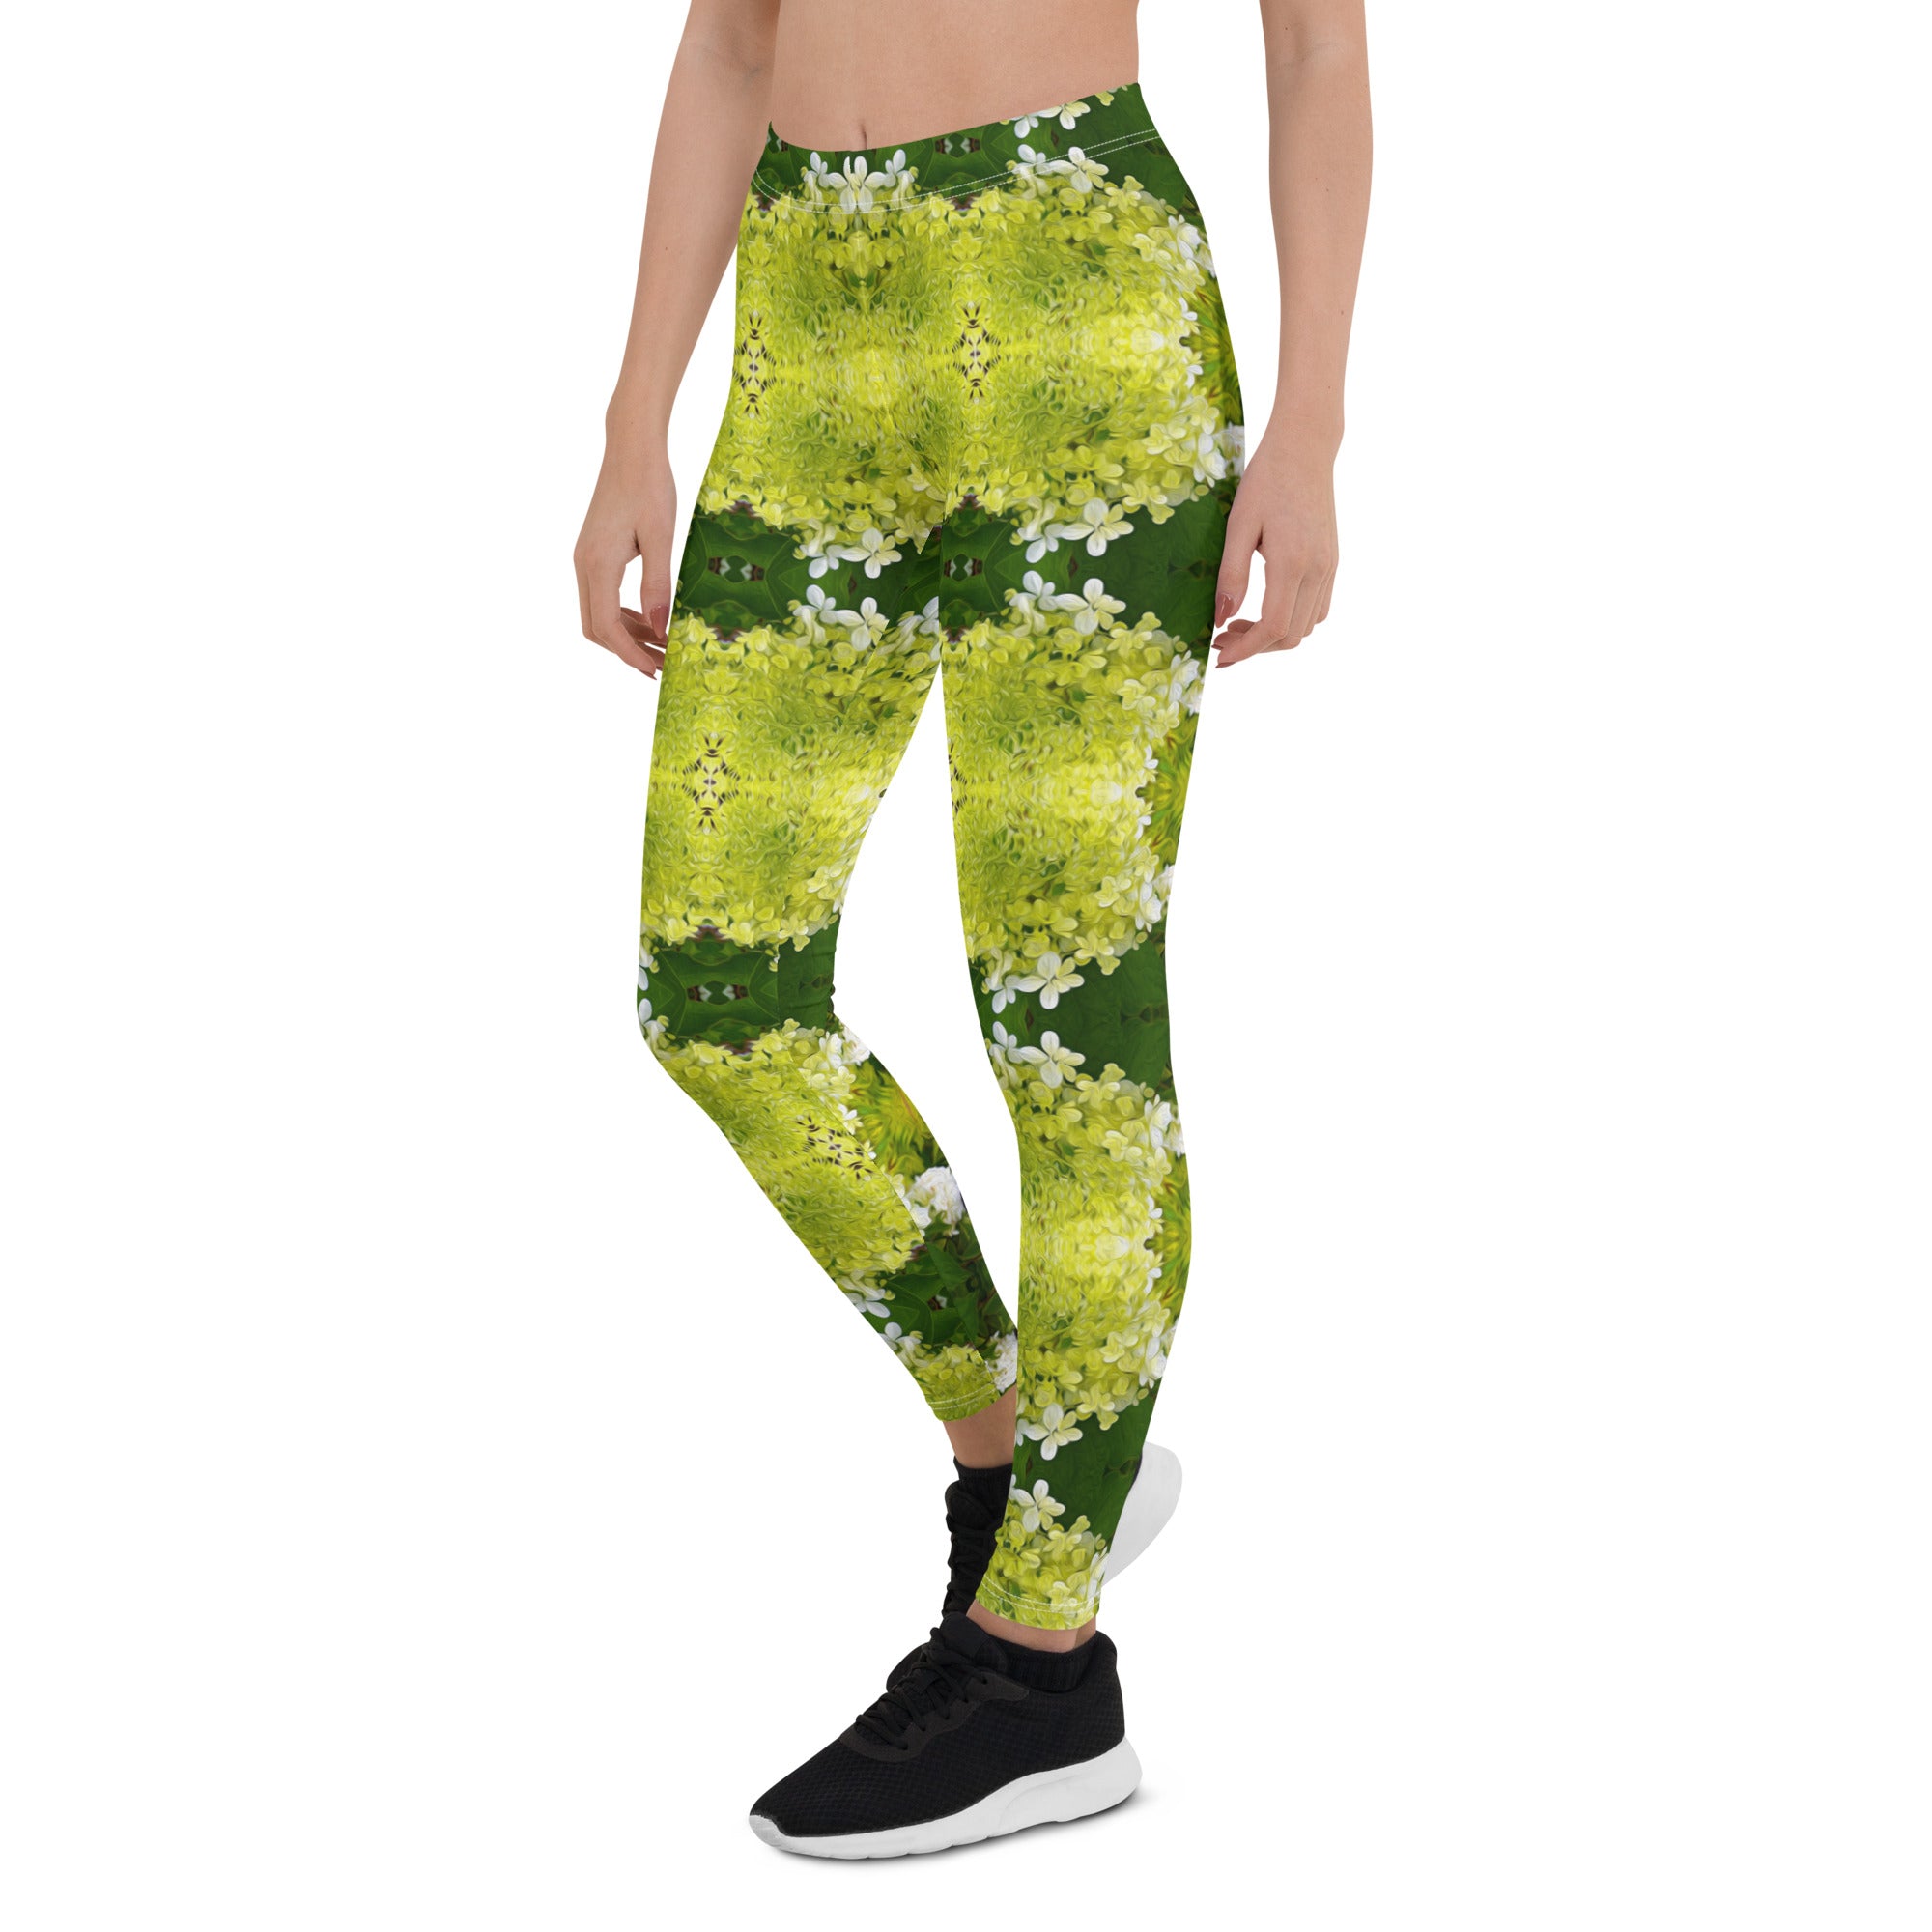 Leggings for Women, Chartreuse Green Abstract Hydrangea Blooms Pattern